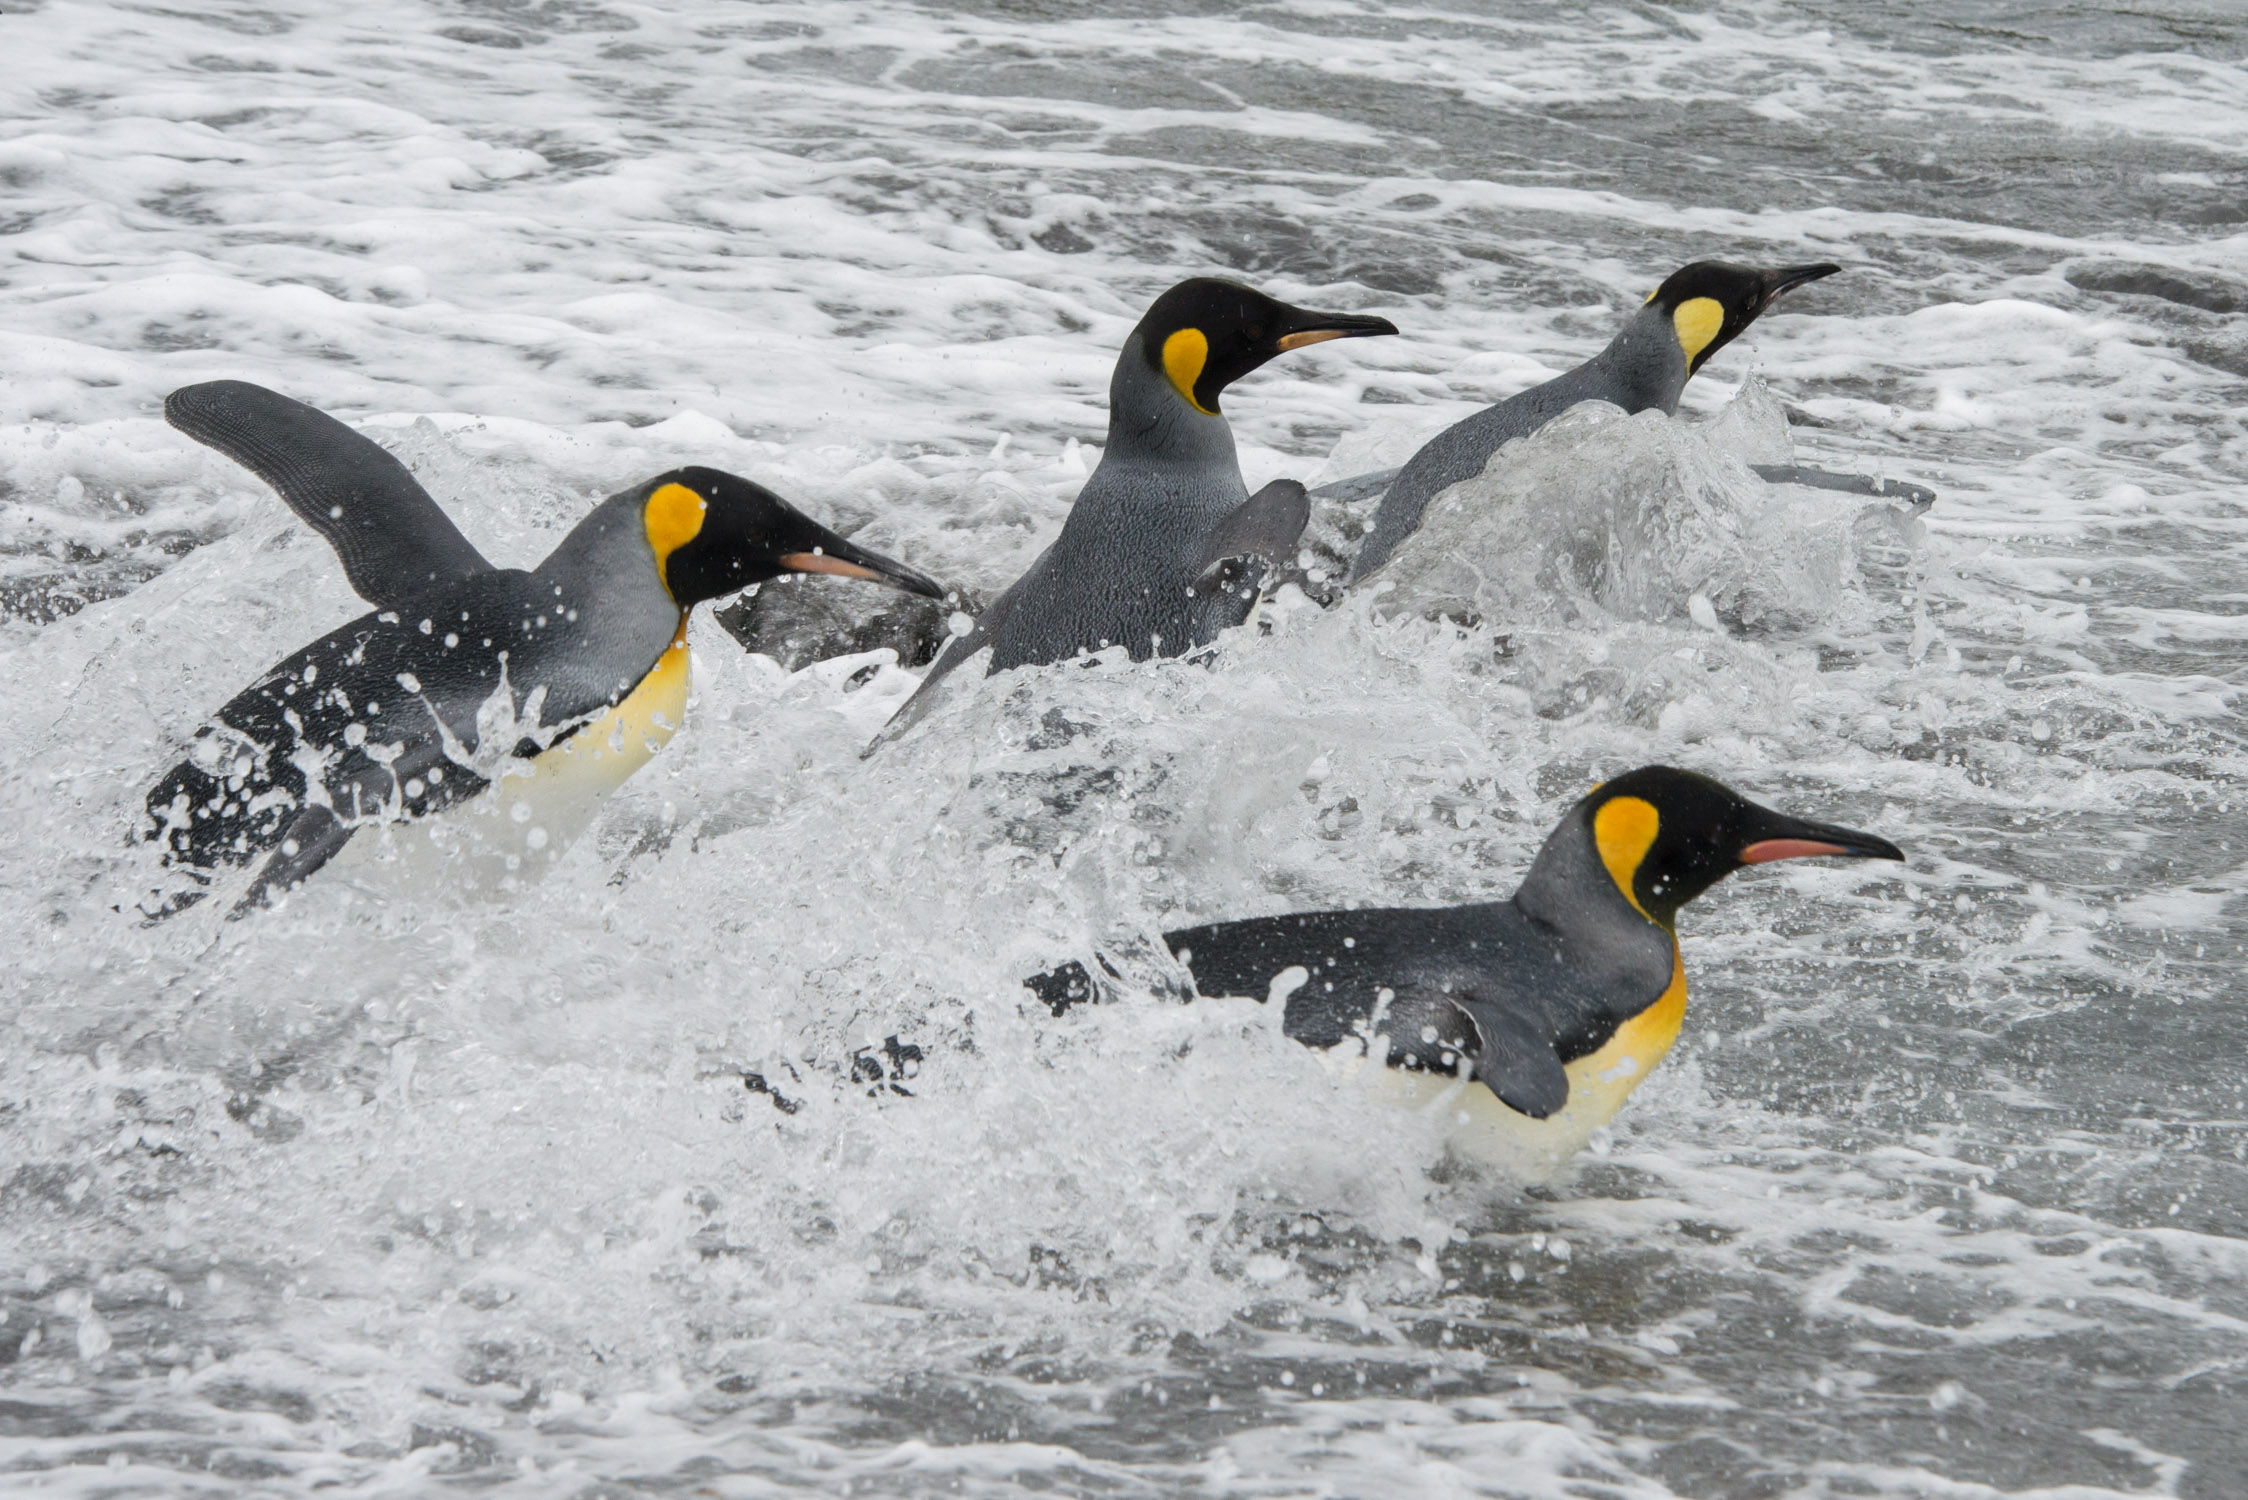 King Penguins coming ashore on Gold Harbour beach, South Georgia.
Picture by Paul Glendell